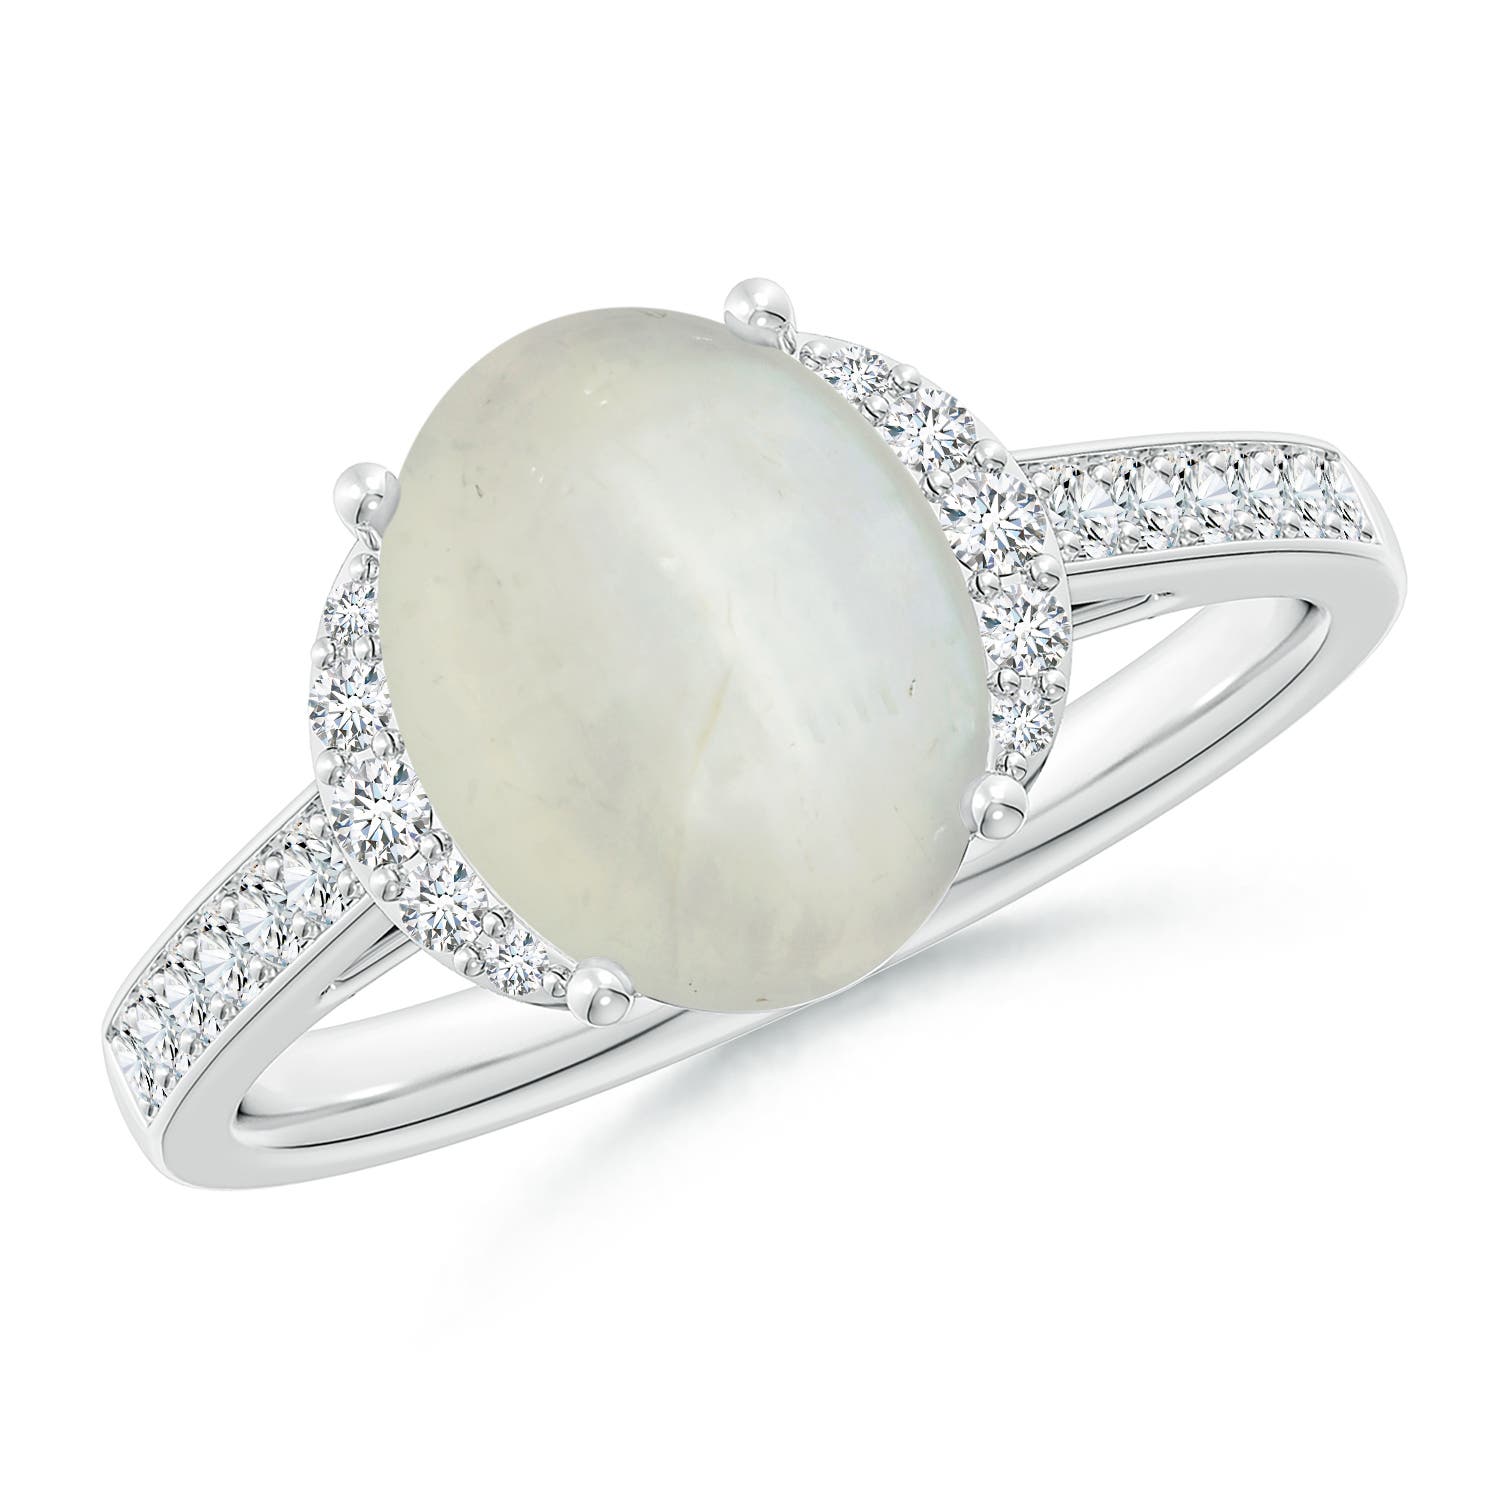 AA - Moonstone / 2.75 CT / 14 KT White Gold